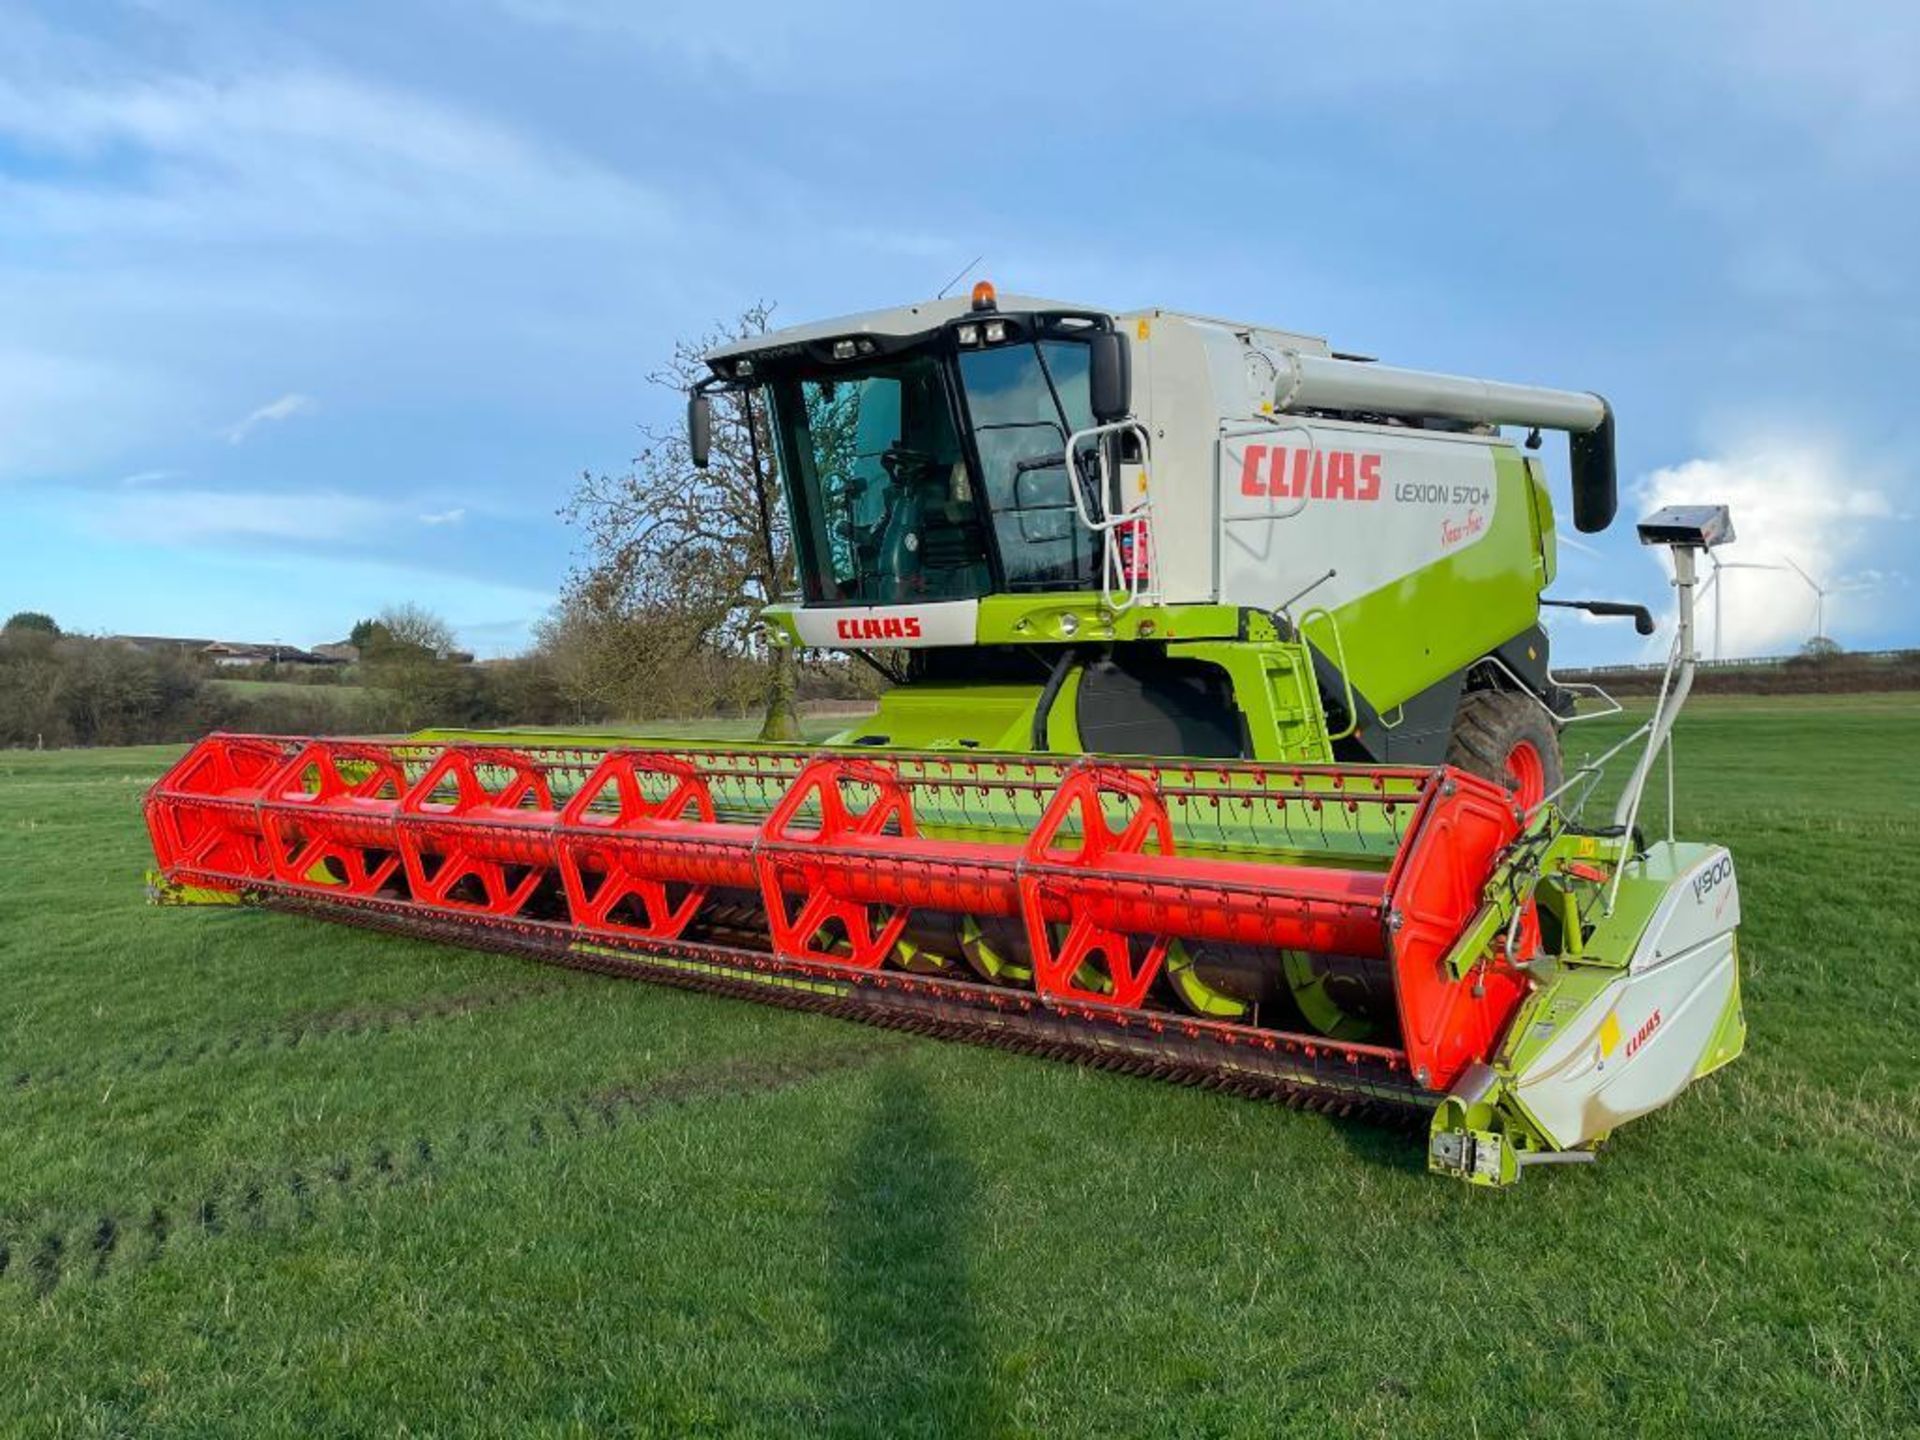 2007 Claas Lexion 570+TT Terra Trac combine harvester with straw chopper and Claas V900 header with - Image 14 of 31